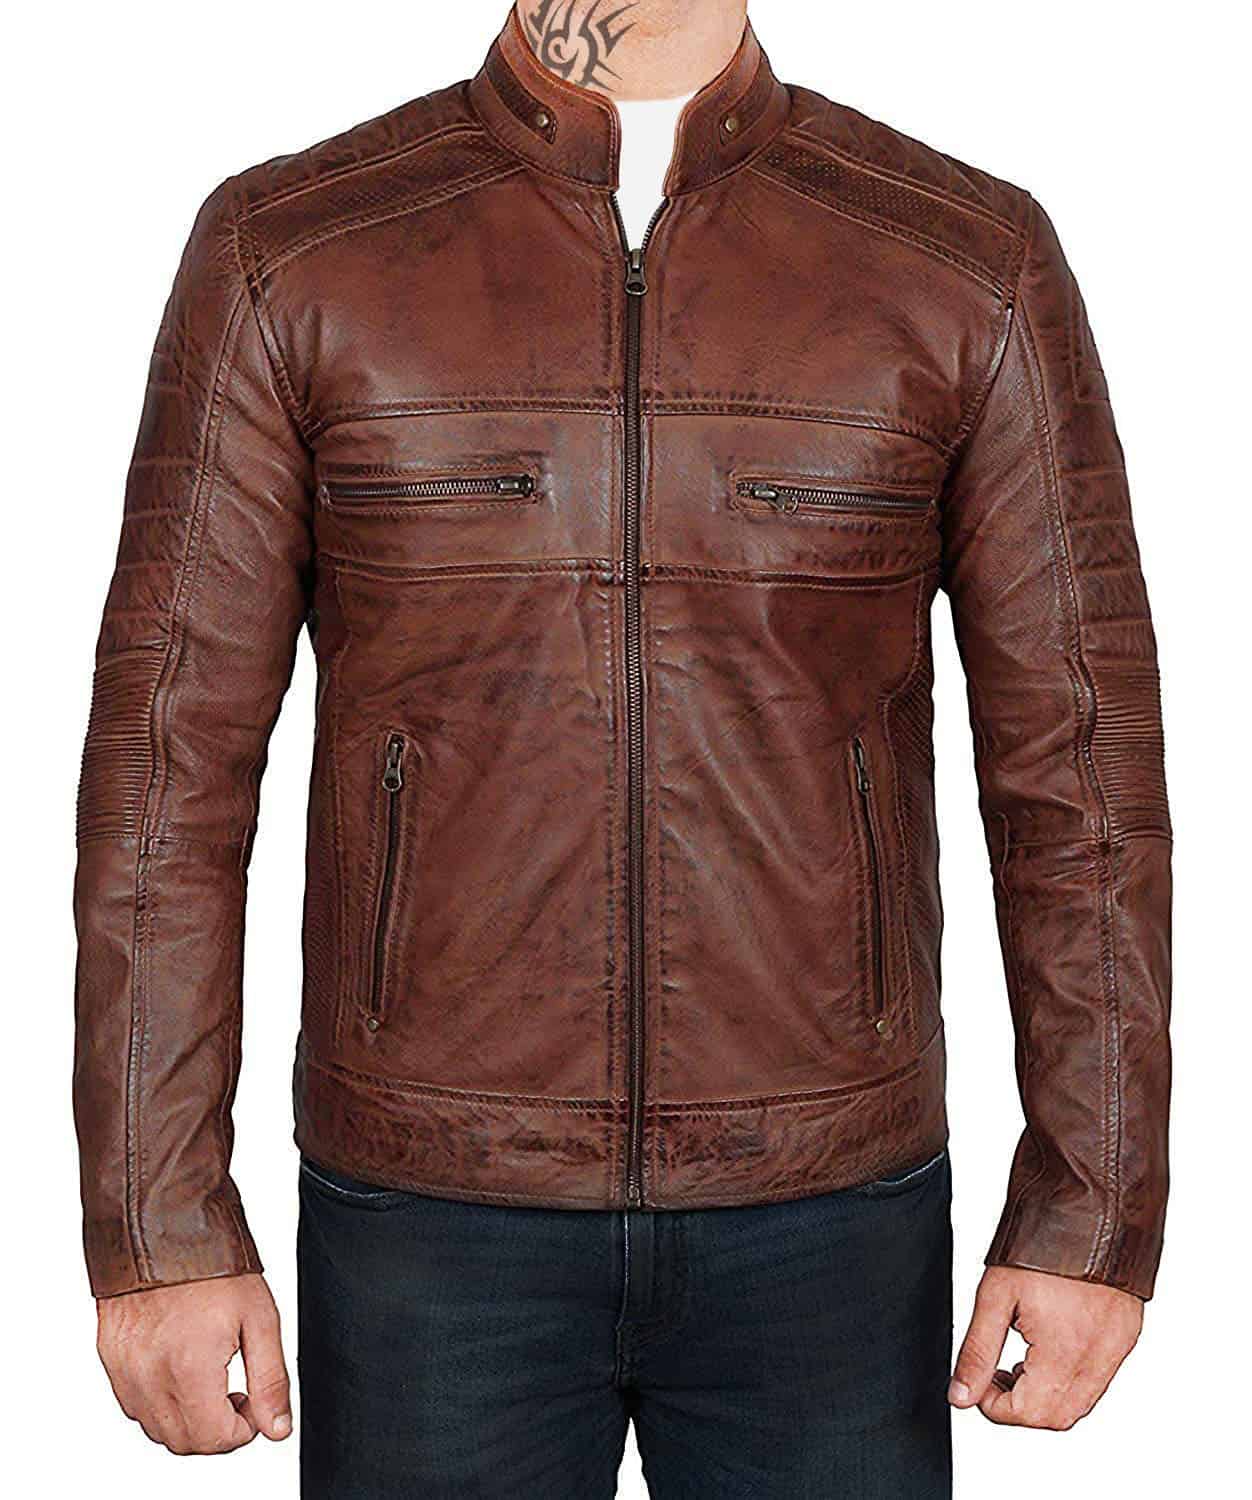 Brown Real leather Jacket for Men